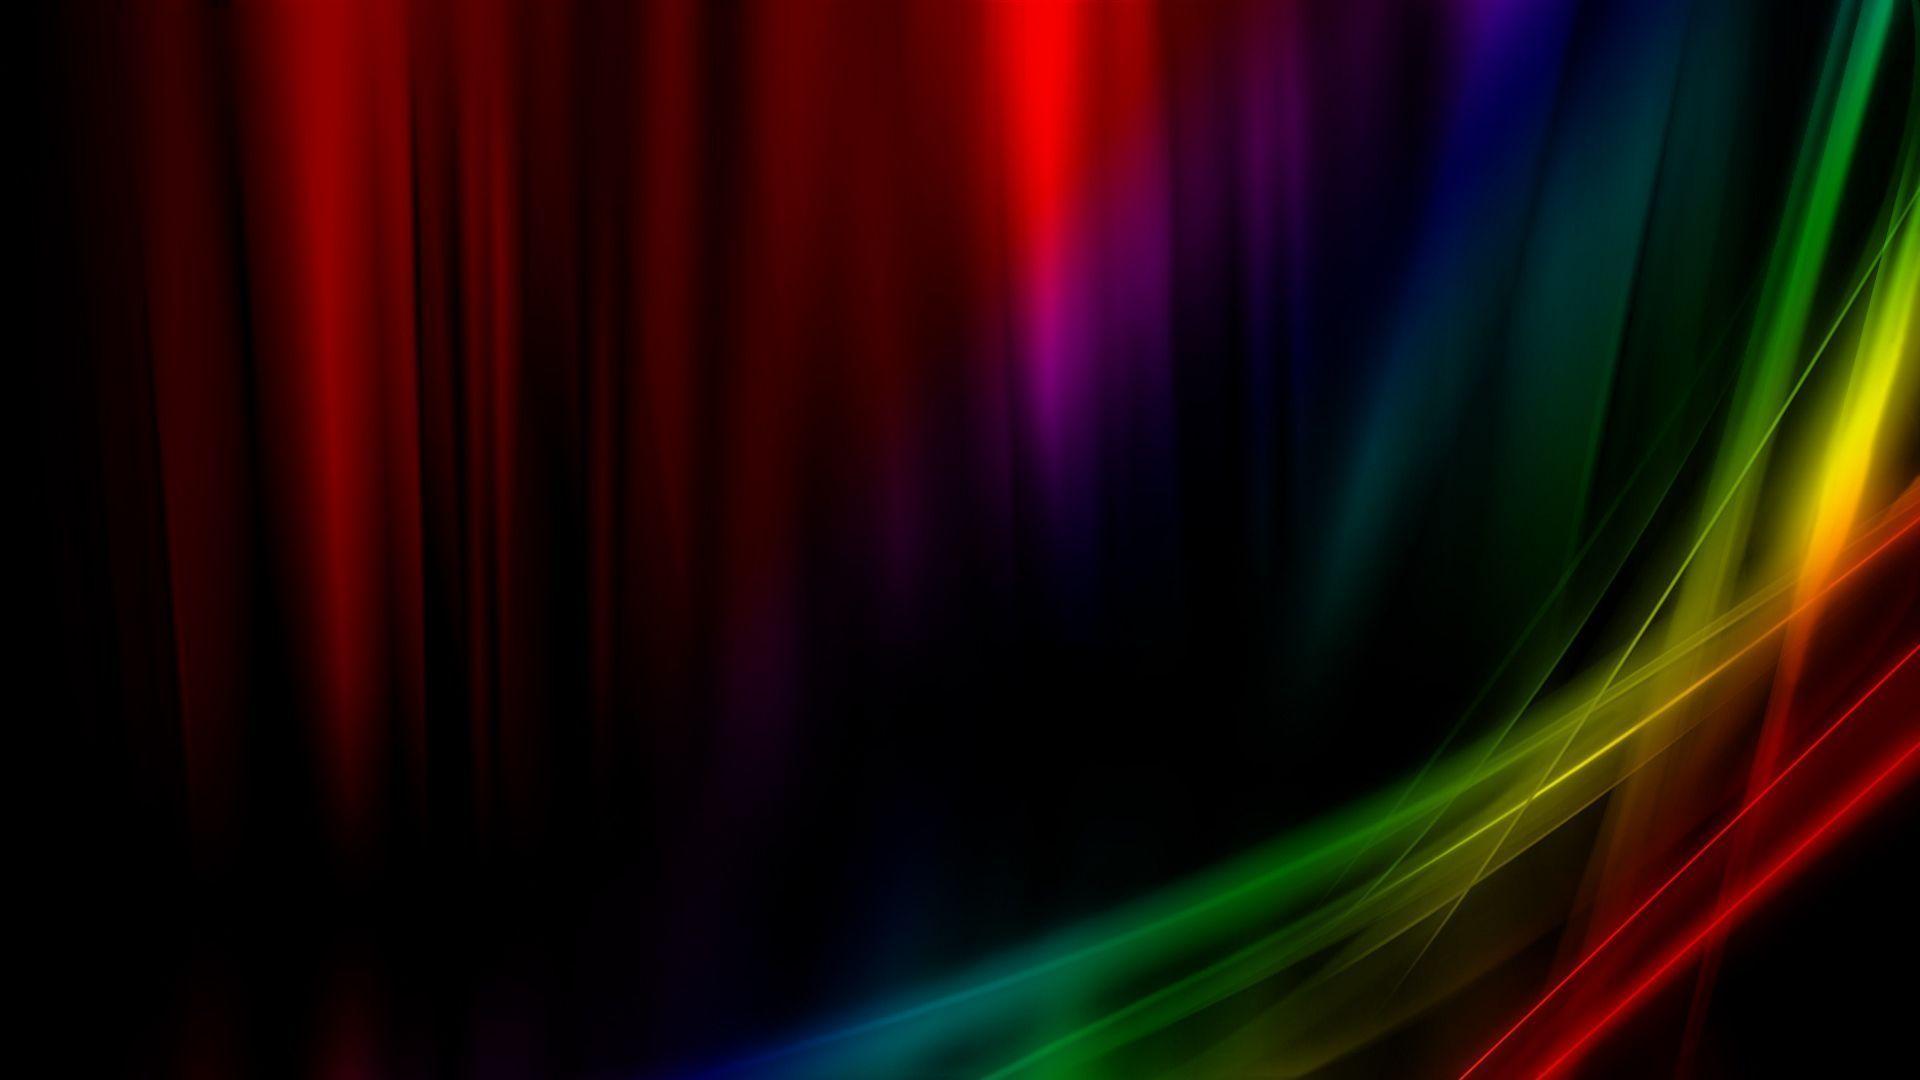 Wallpaper For > Neon Bright Colored Background